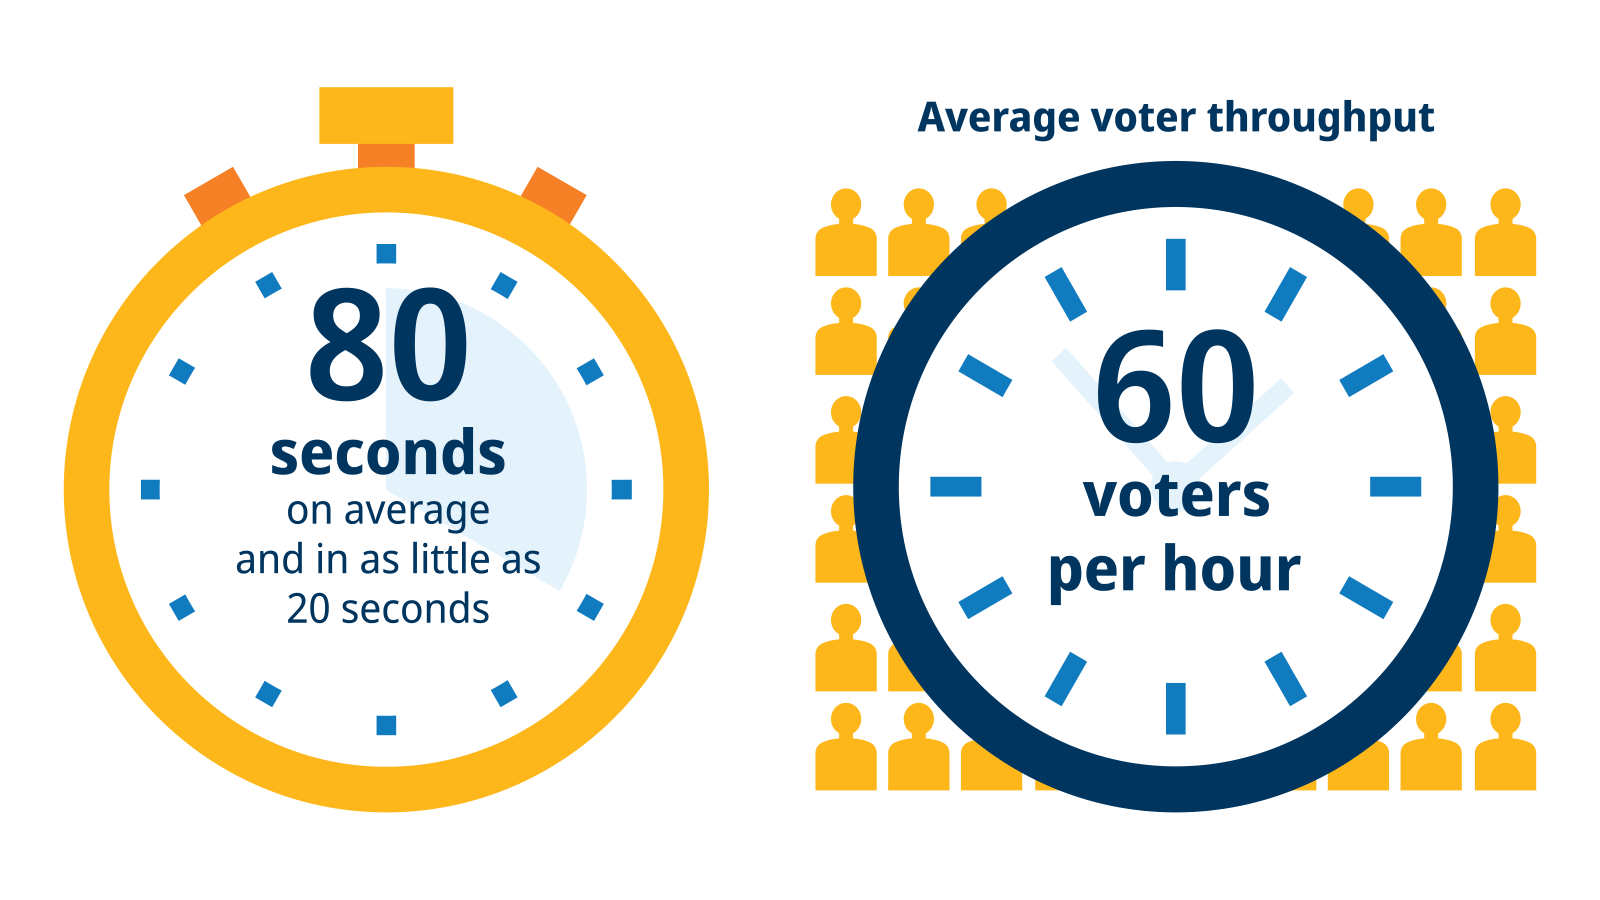 Infographic: How fast is the voting experience on ExpressVote XL? 80 seconds on average and in as little as 20 seconds. Average voter throughput: 60 voters per hour.